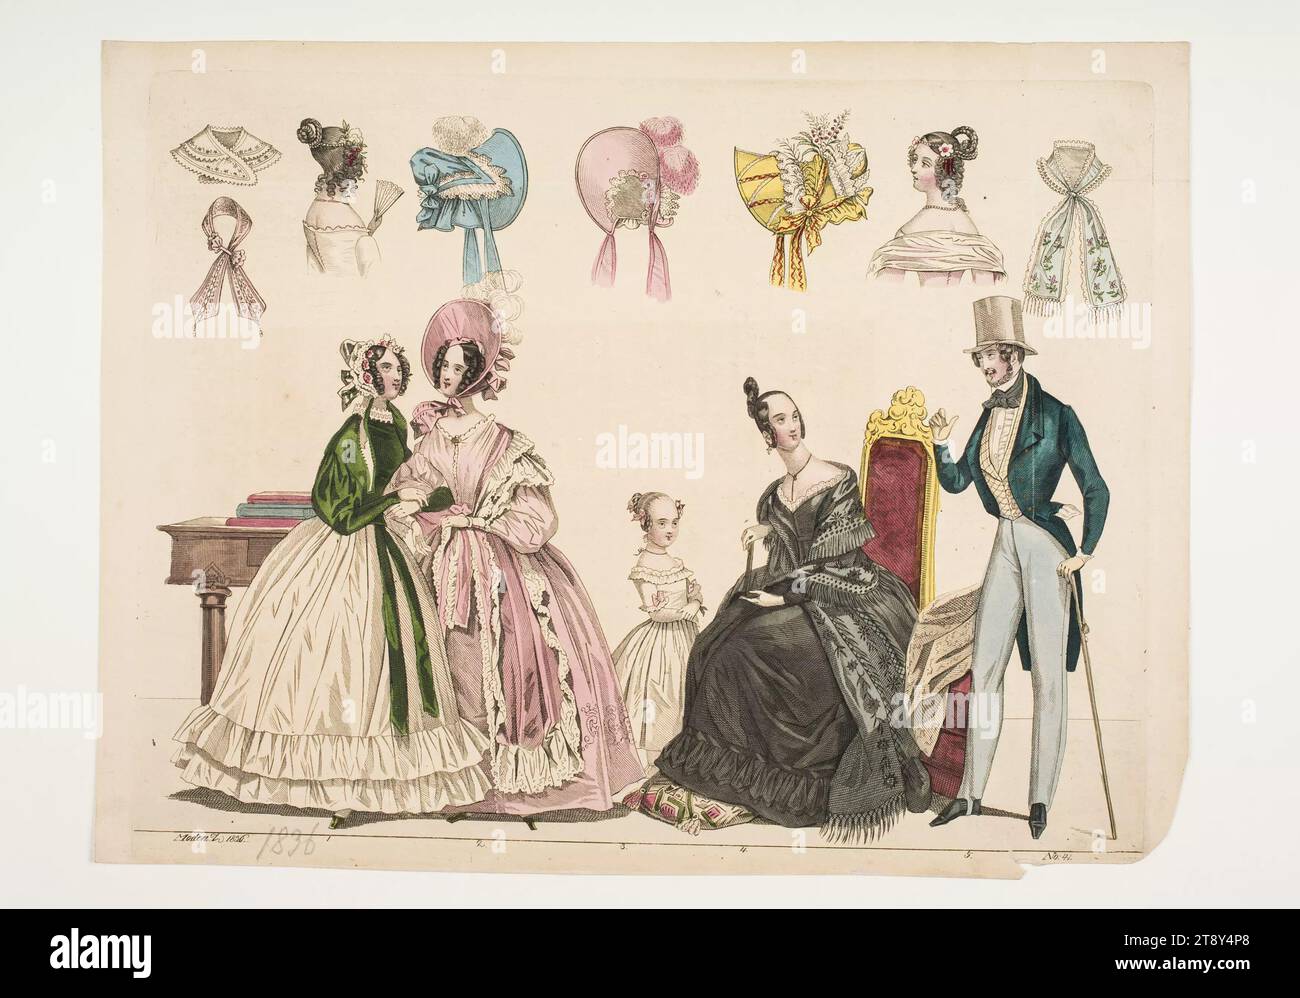 Fashion picture: five figures, women's, men's and children's fashions, hats, collars, and hairstyles, Unknown, 1836, paper, colored, copperplate engraving, height 28.4 cm, width 21.5 cm, plate size 26.2×20.7 cm, fashion, bourgeoisie, family, fashion plates, headdress, fashion, clothes (+ girl's clothes), hairstyle, dandy, pretty boy, hair dress, coat, girl's dress, woman, man, child, accessories ( clothes), The Vienna Collection Stock Photo